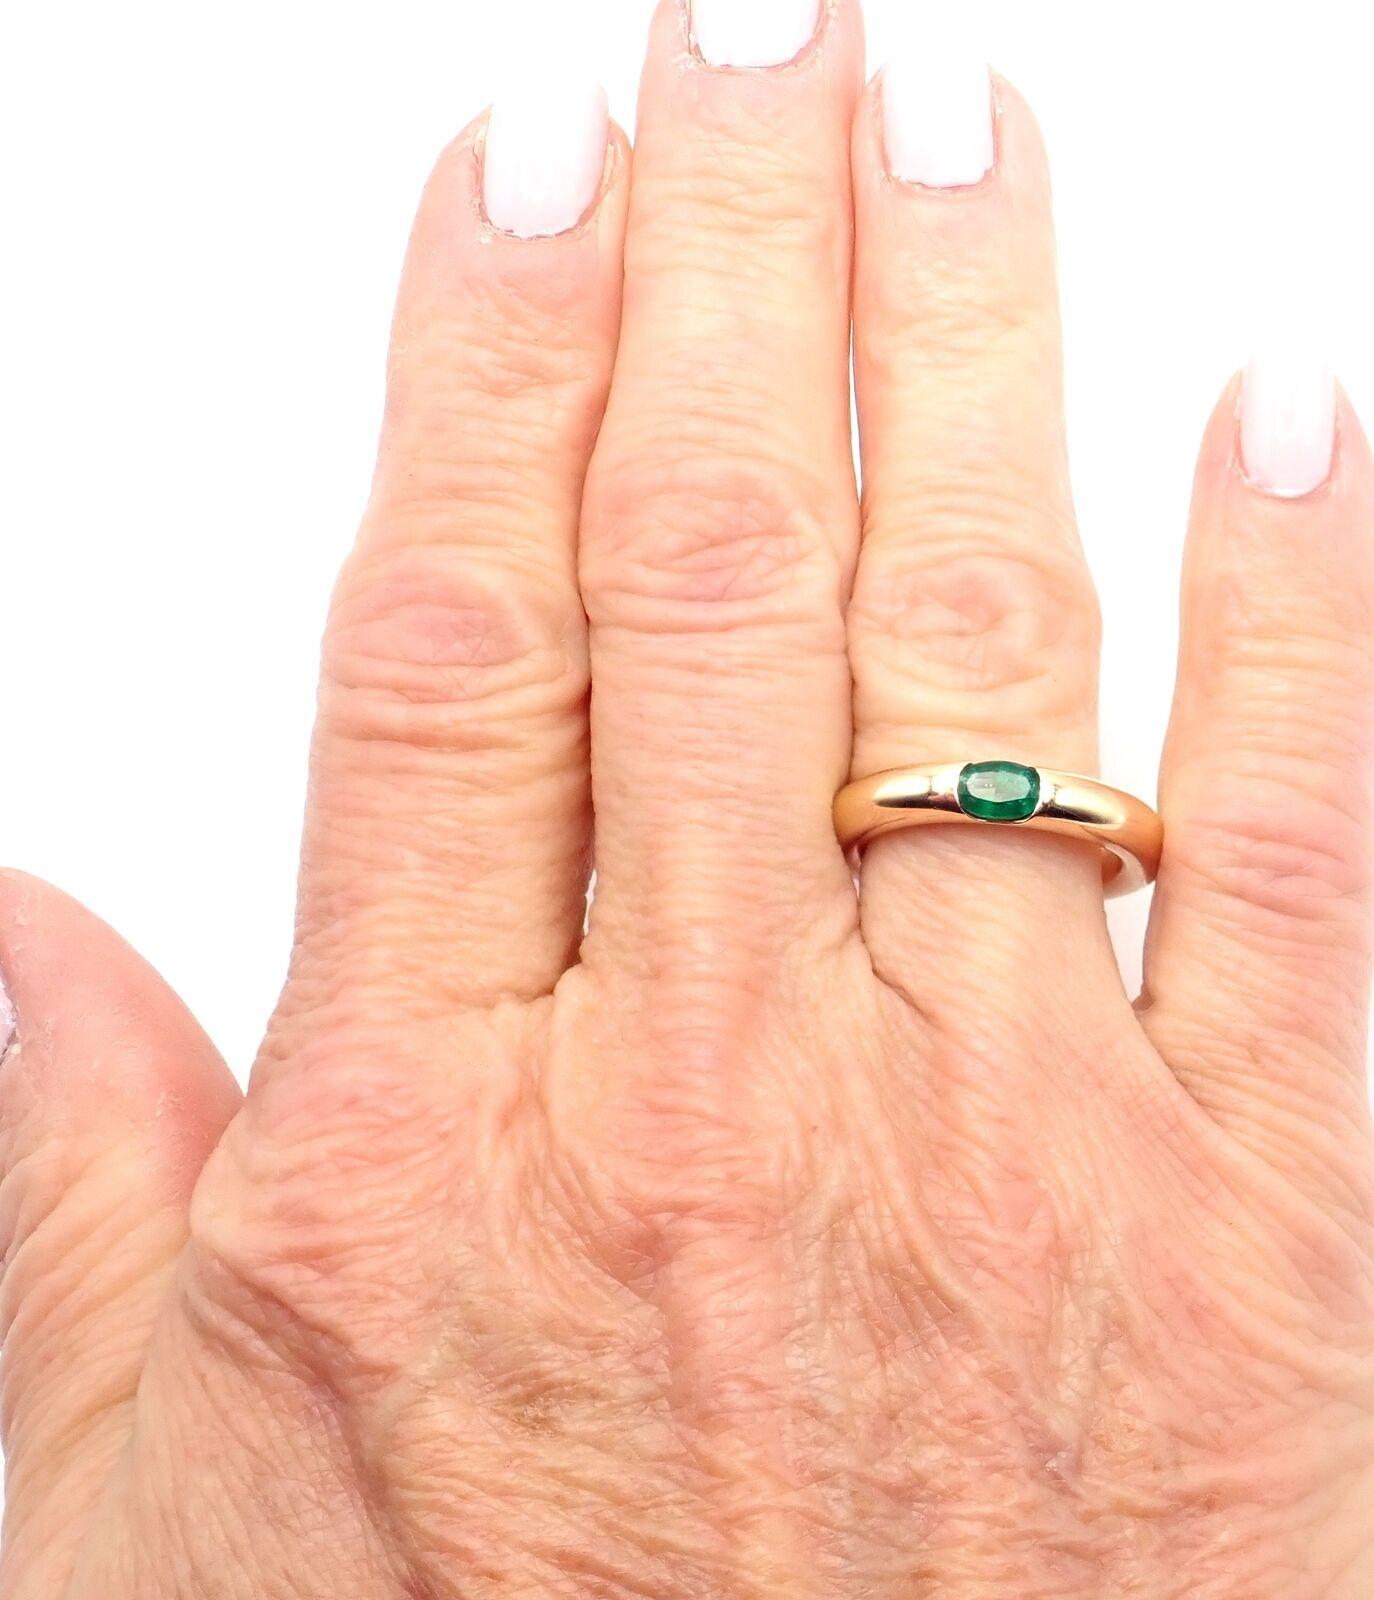 Cartier Emerald Ellipse Yellow Gold Band Ring 1